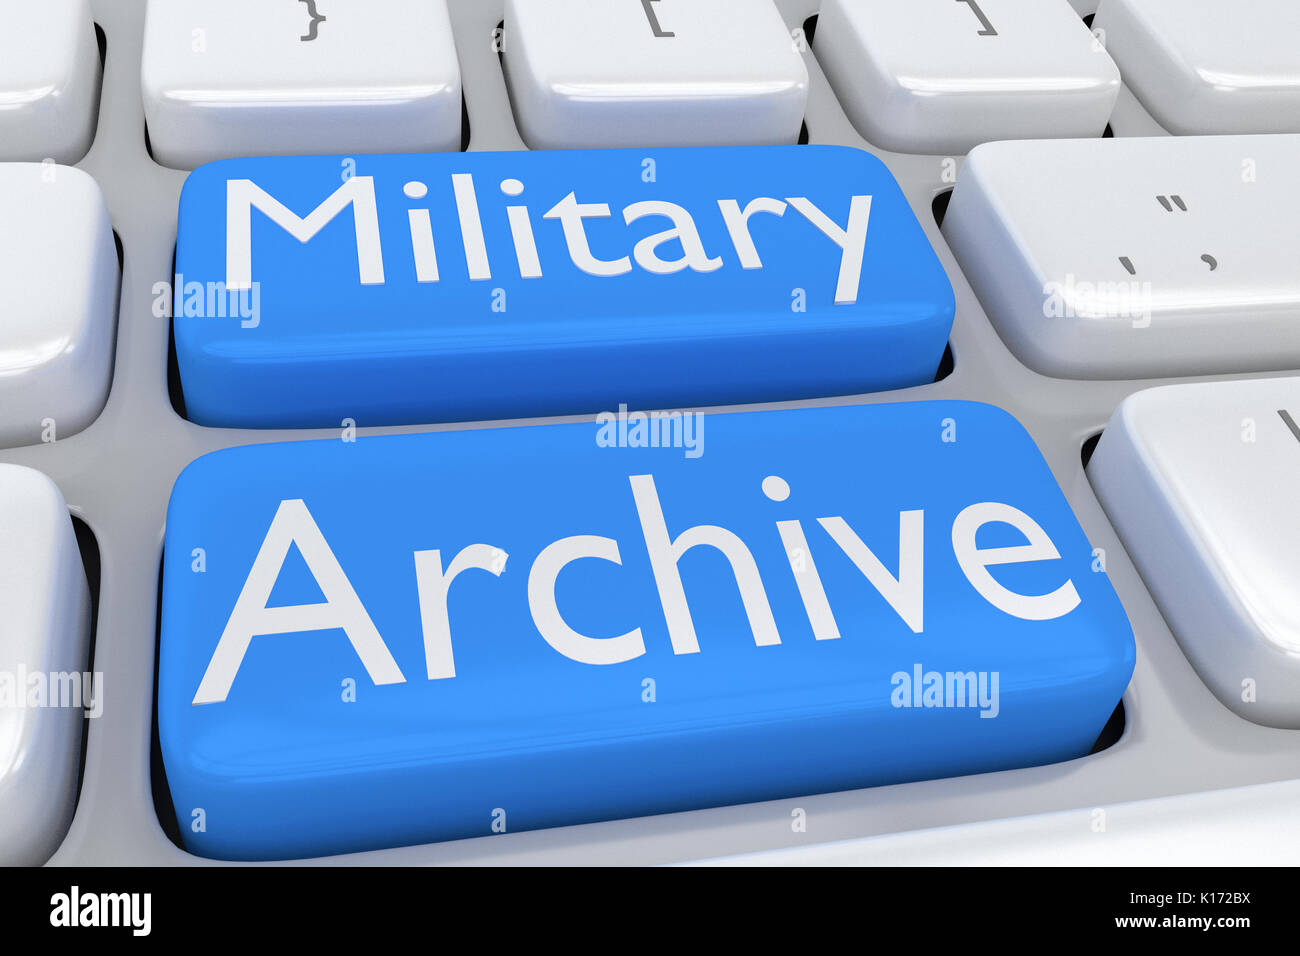 3D illustration of computer keyboard with the script 'Military Archive' on two adjacent pale blue buttons Stock Photo